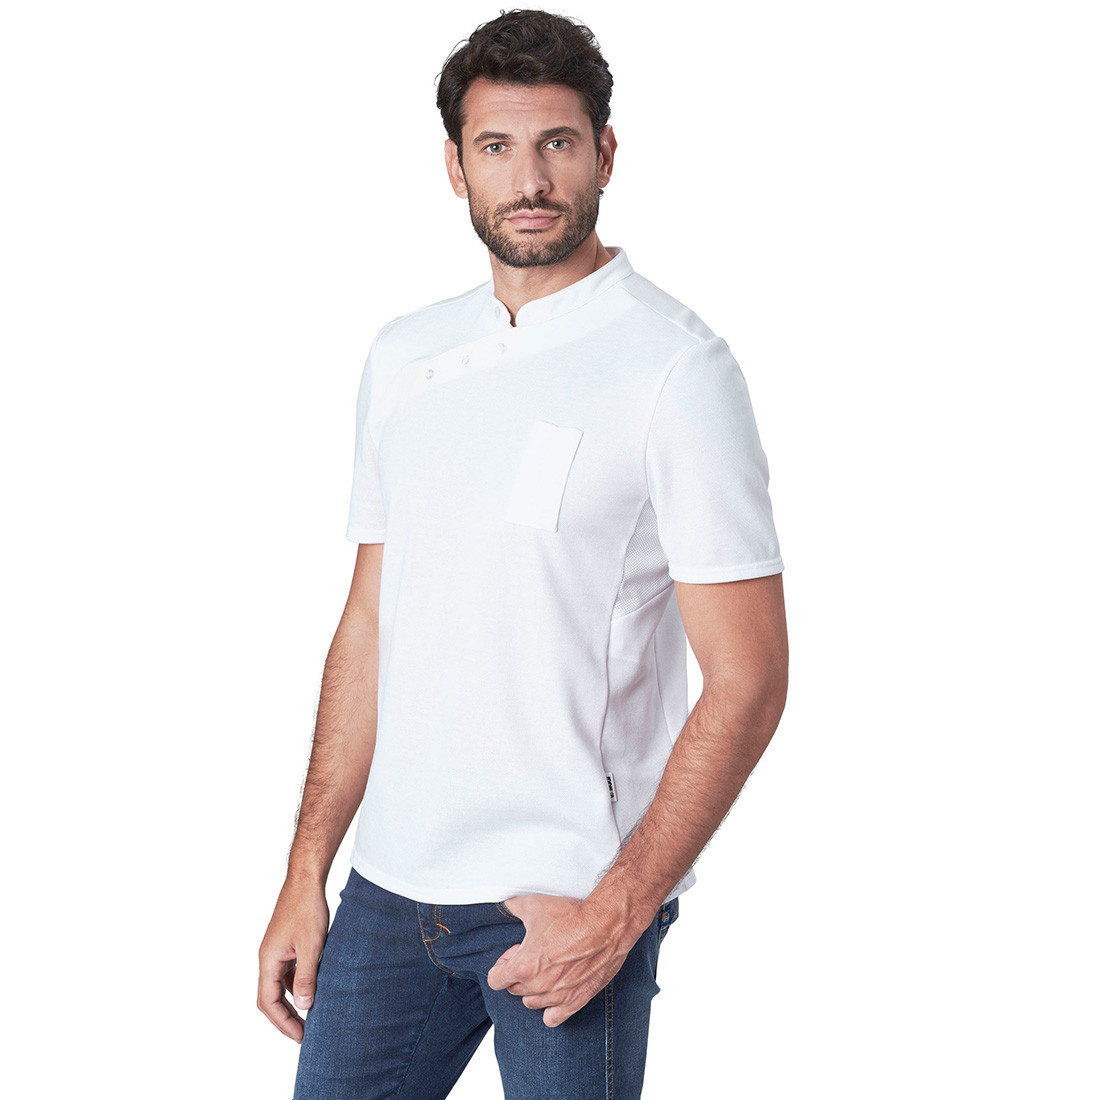 FEDRO Chef's Polo T-shirt - Safetywear